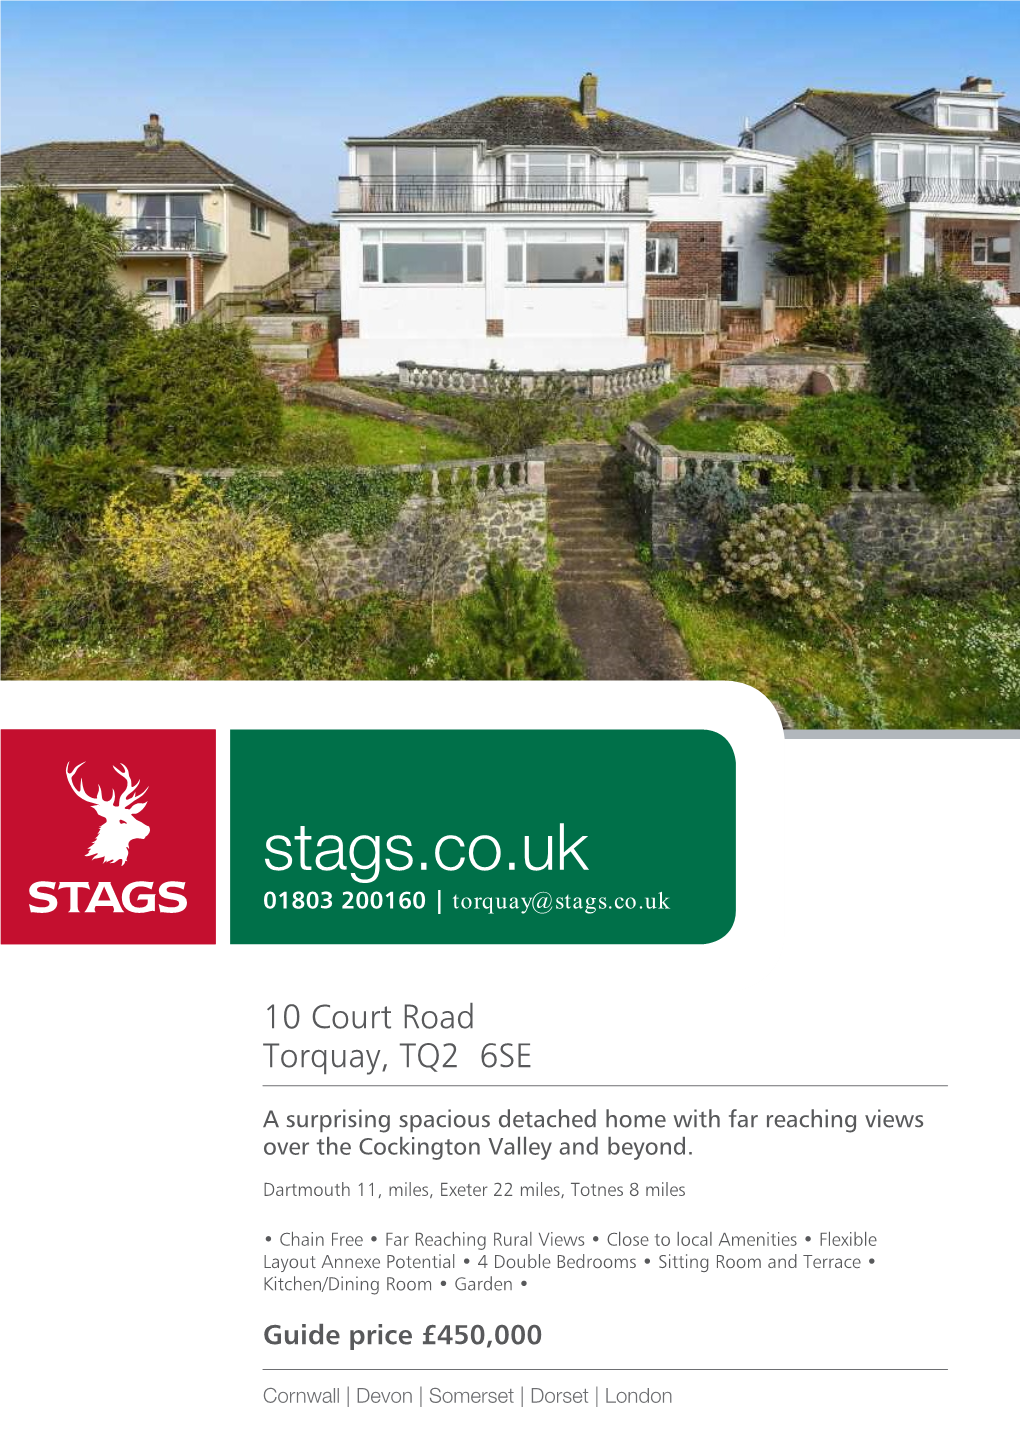 Stags.Co.Uk 01803 200160 | Torquay@Stags.Co.Uk